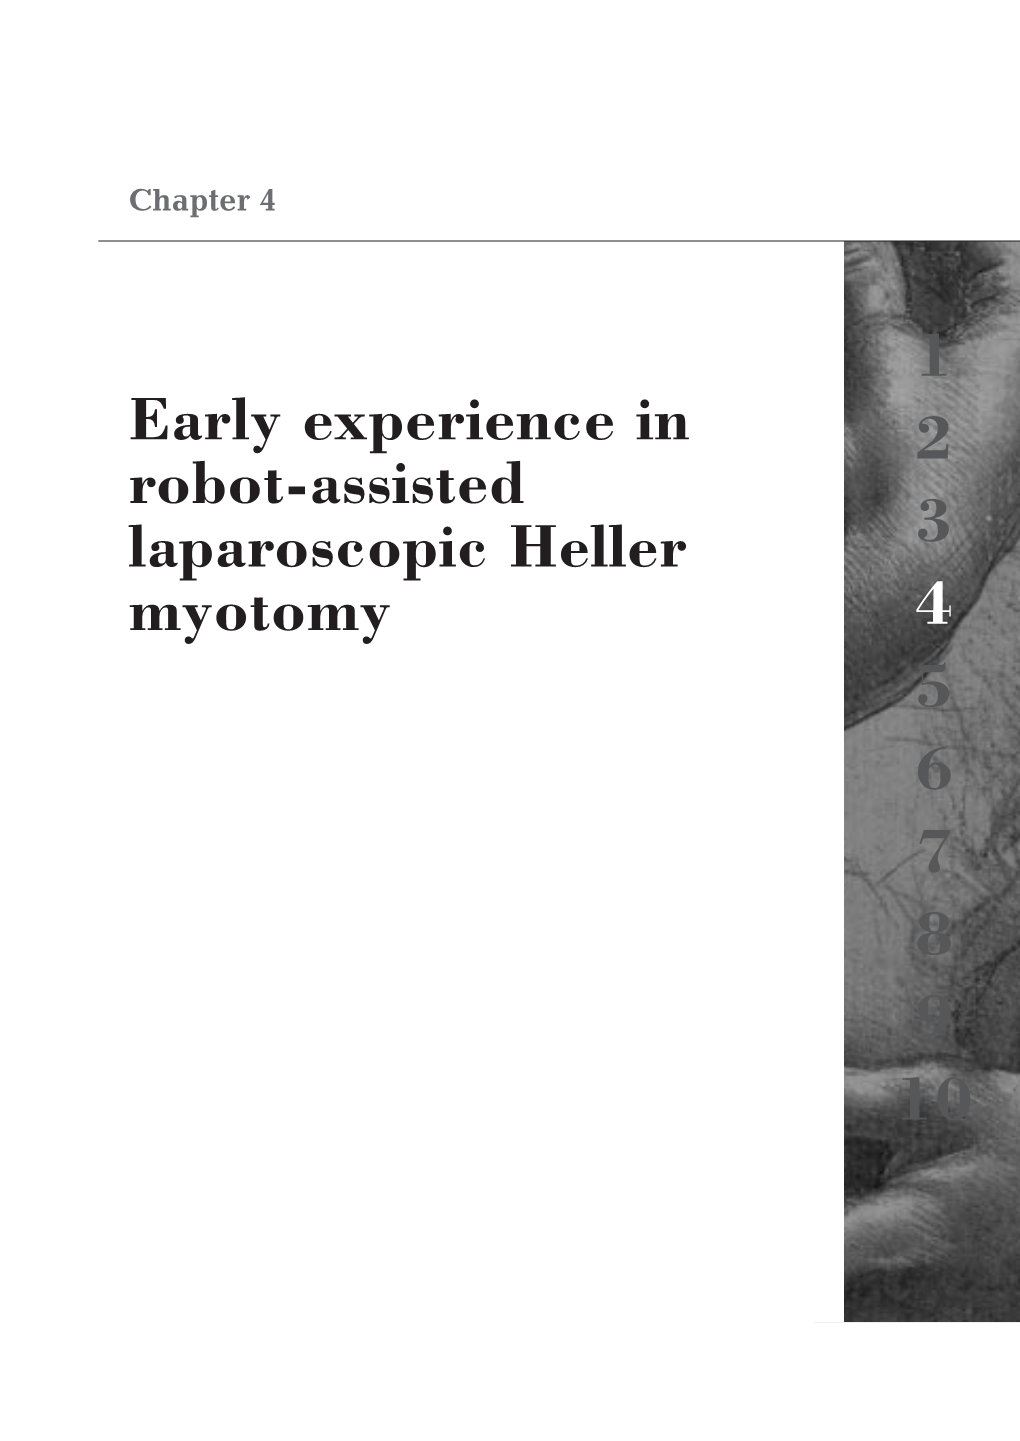 Early Experience in Robot-Assisted Laparoscopic Heller Myotomy Introduction